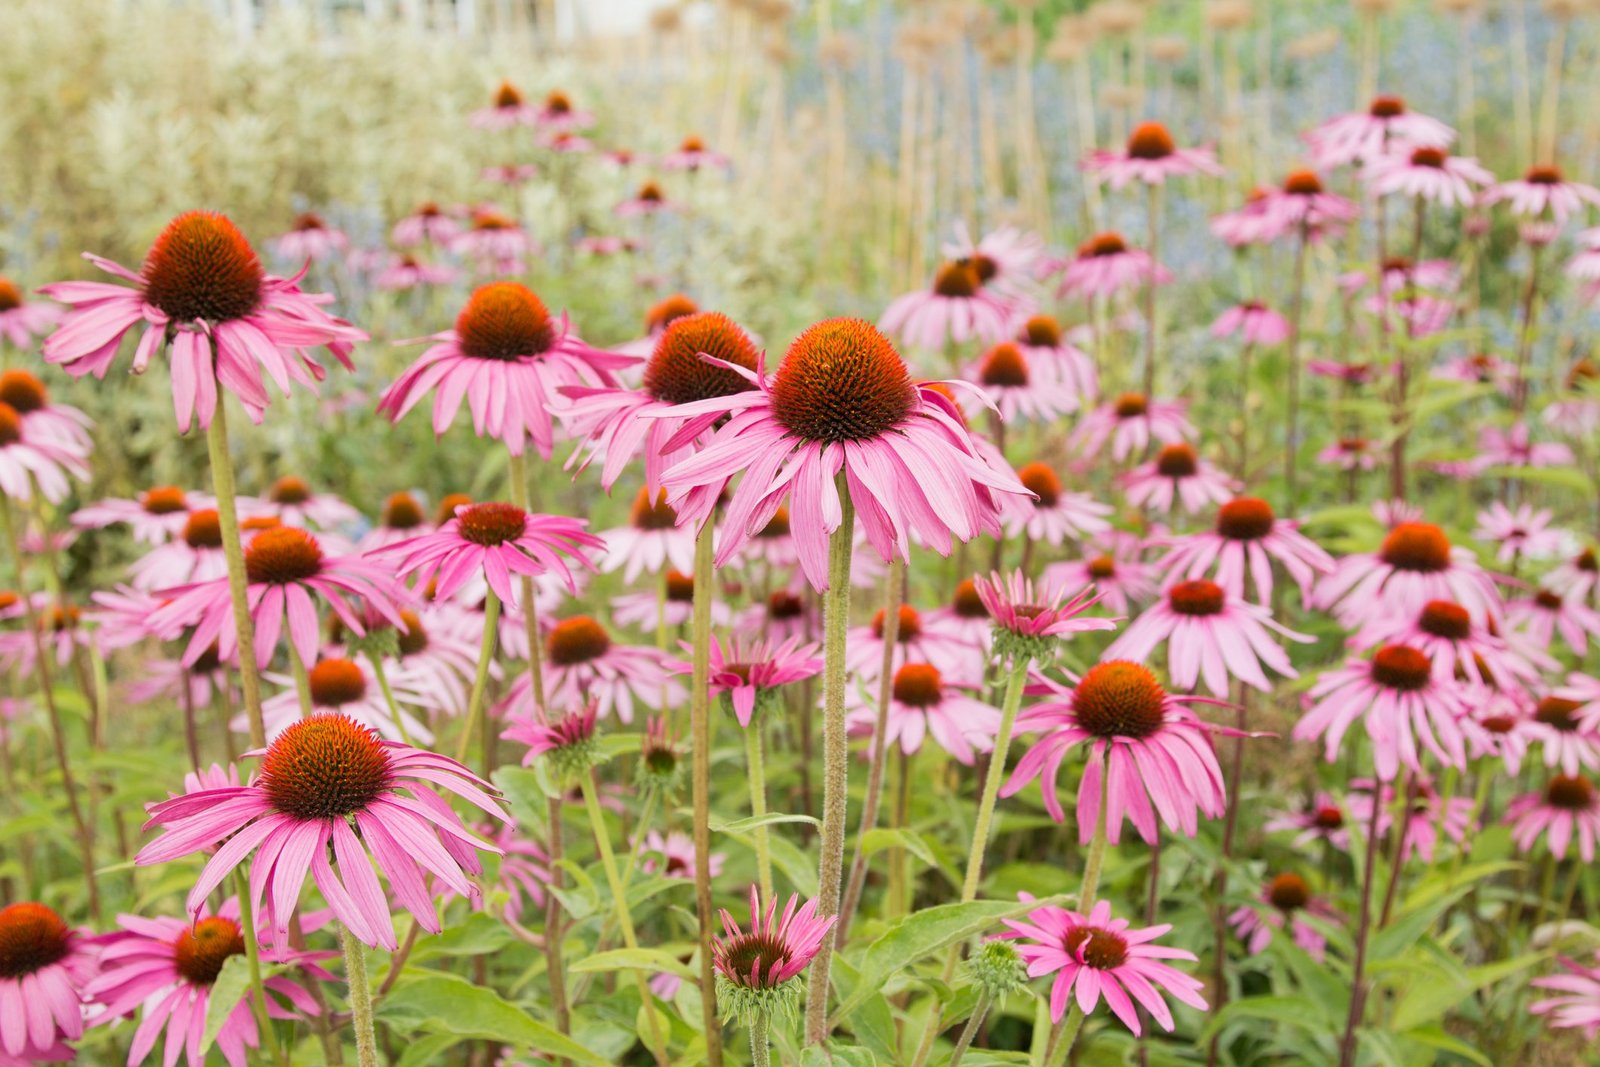 Echinacea: Cold fighter and immune system booster